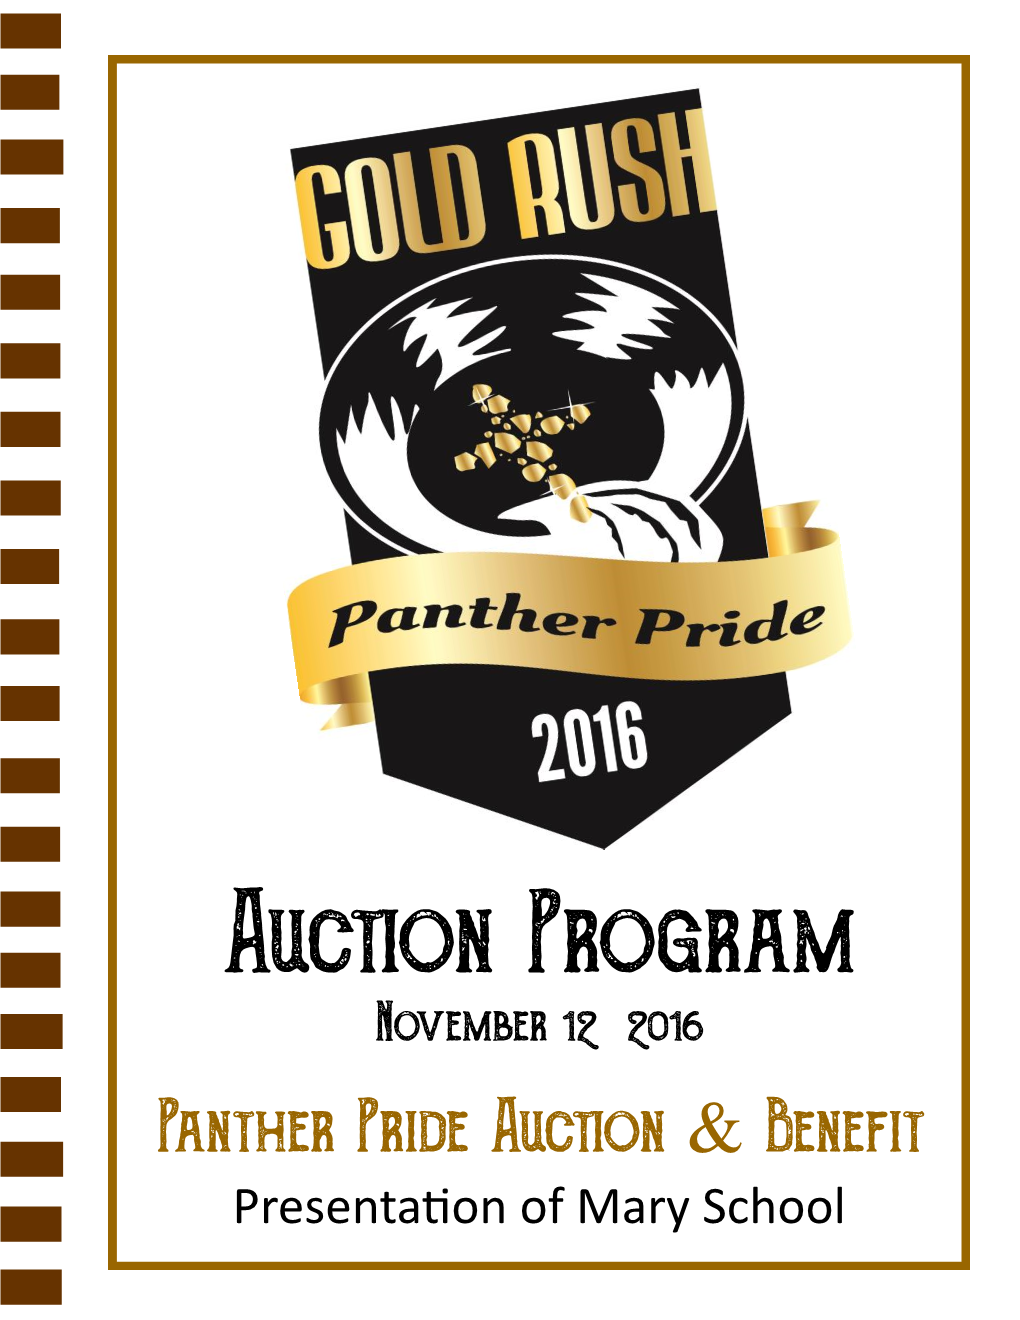 Panther Pride Auction & Benefit